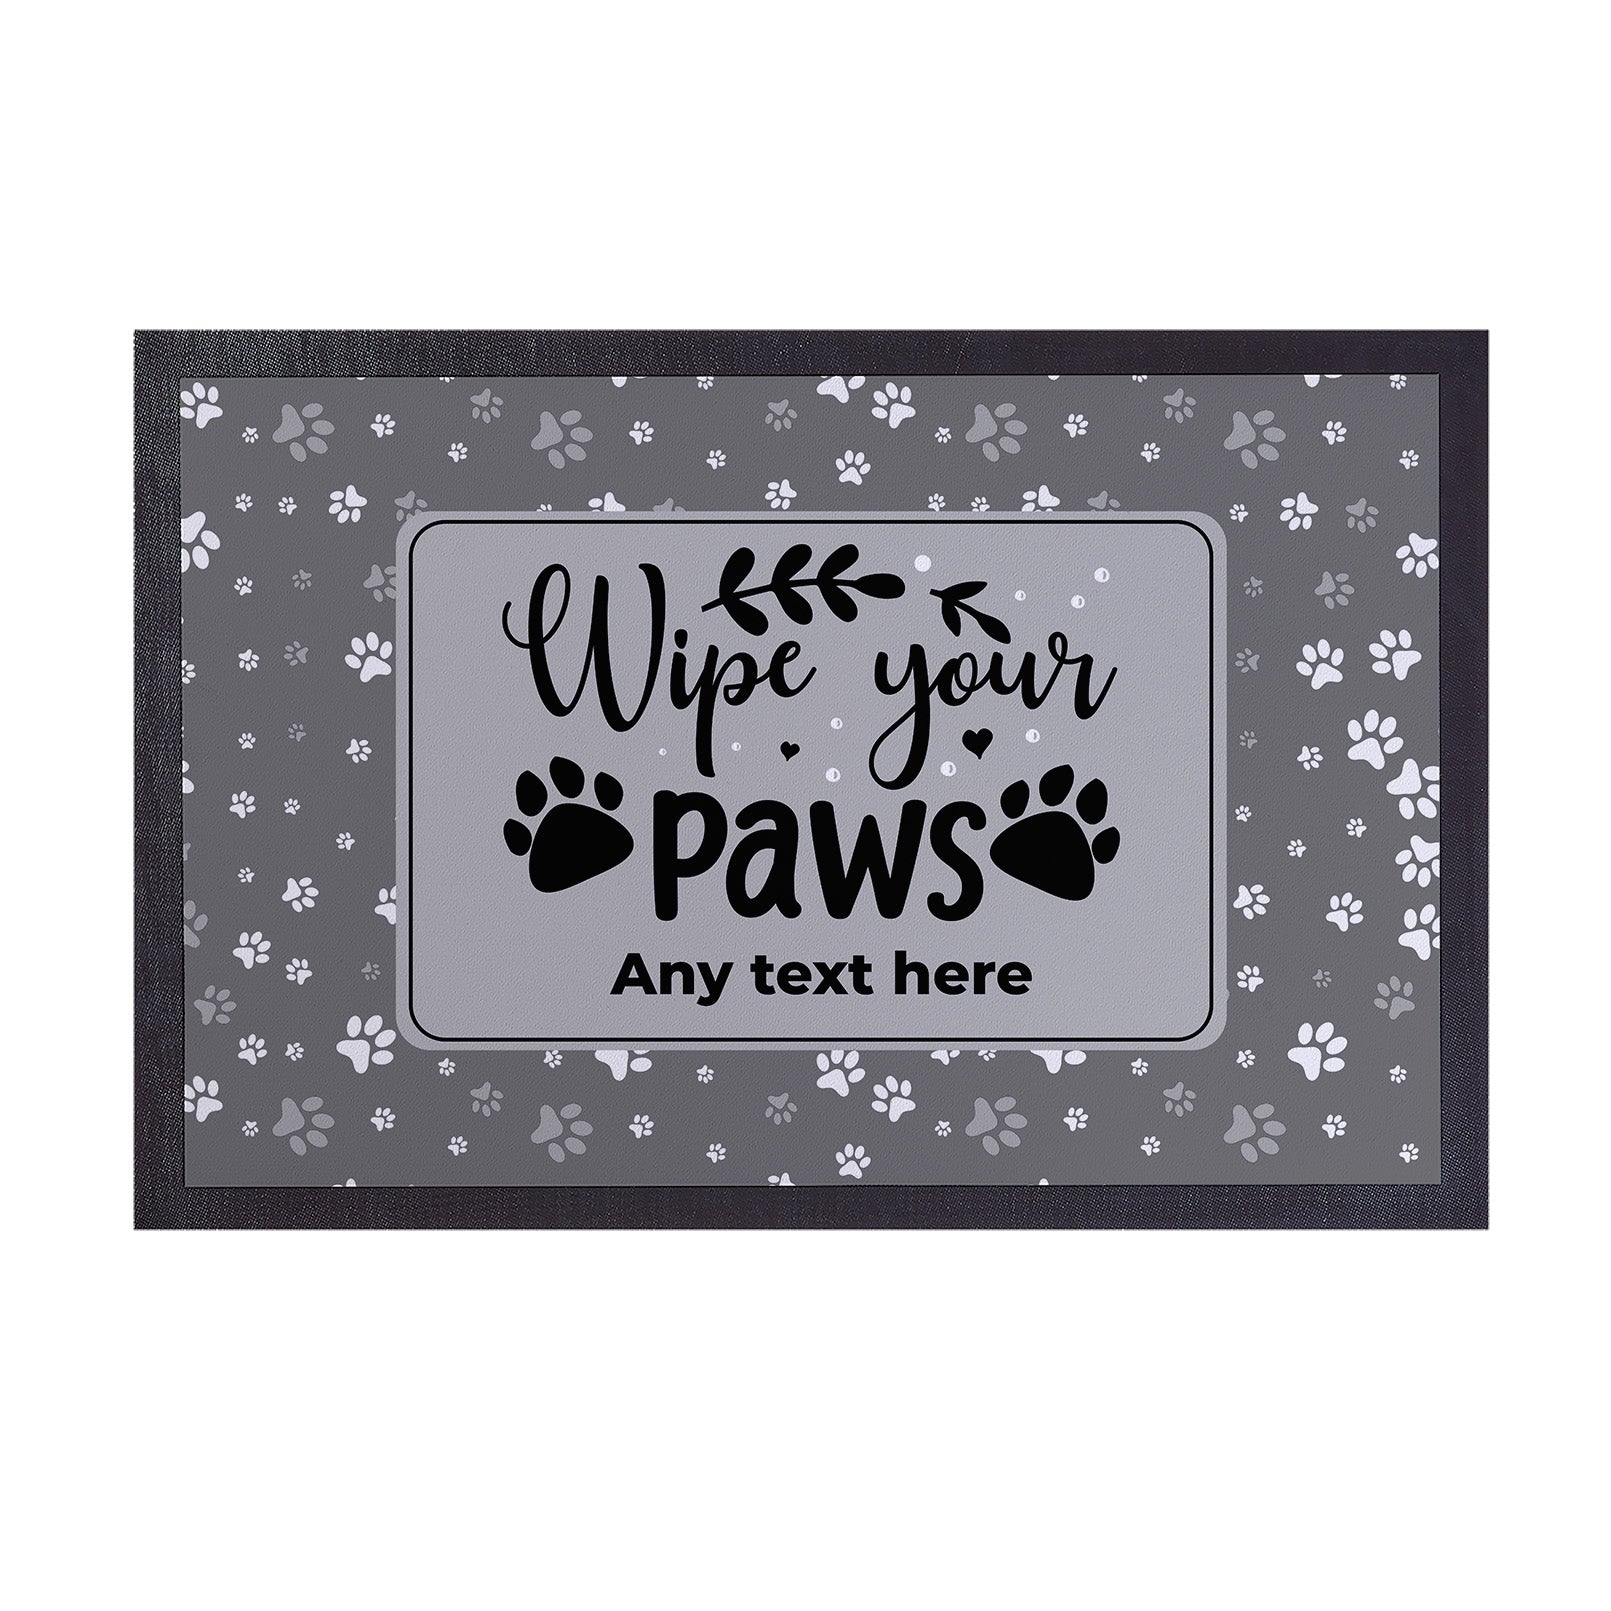 Wipe your paws Door Mat-White-Main.jpg__PID:6a3baf7d-f260-4c89-bd74-f91343bc3224